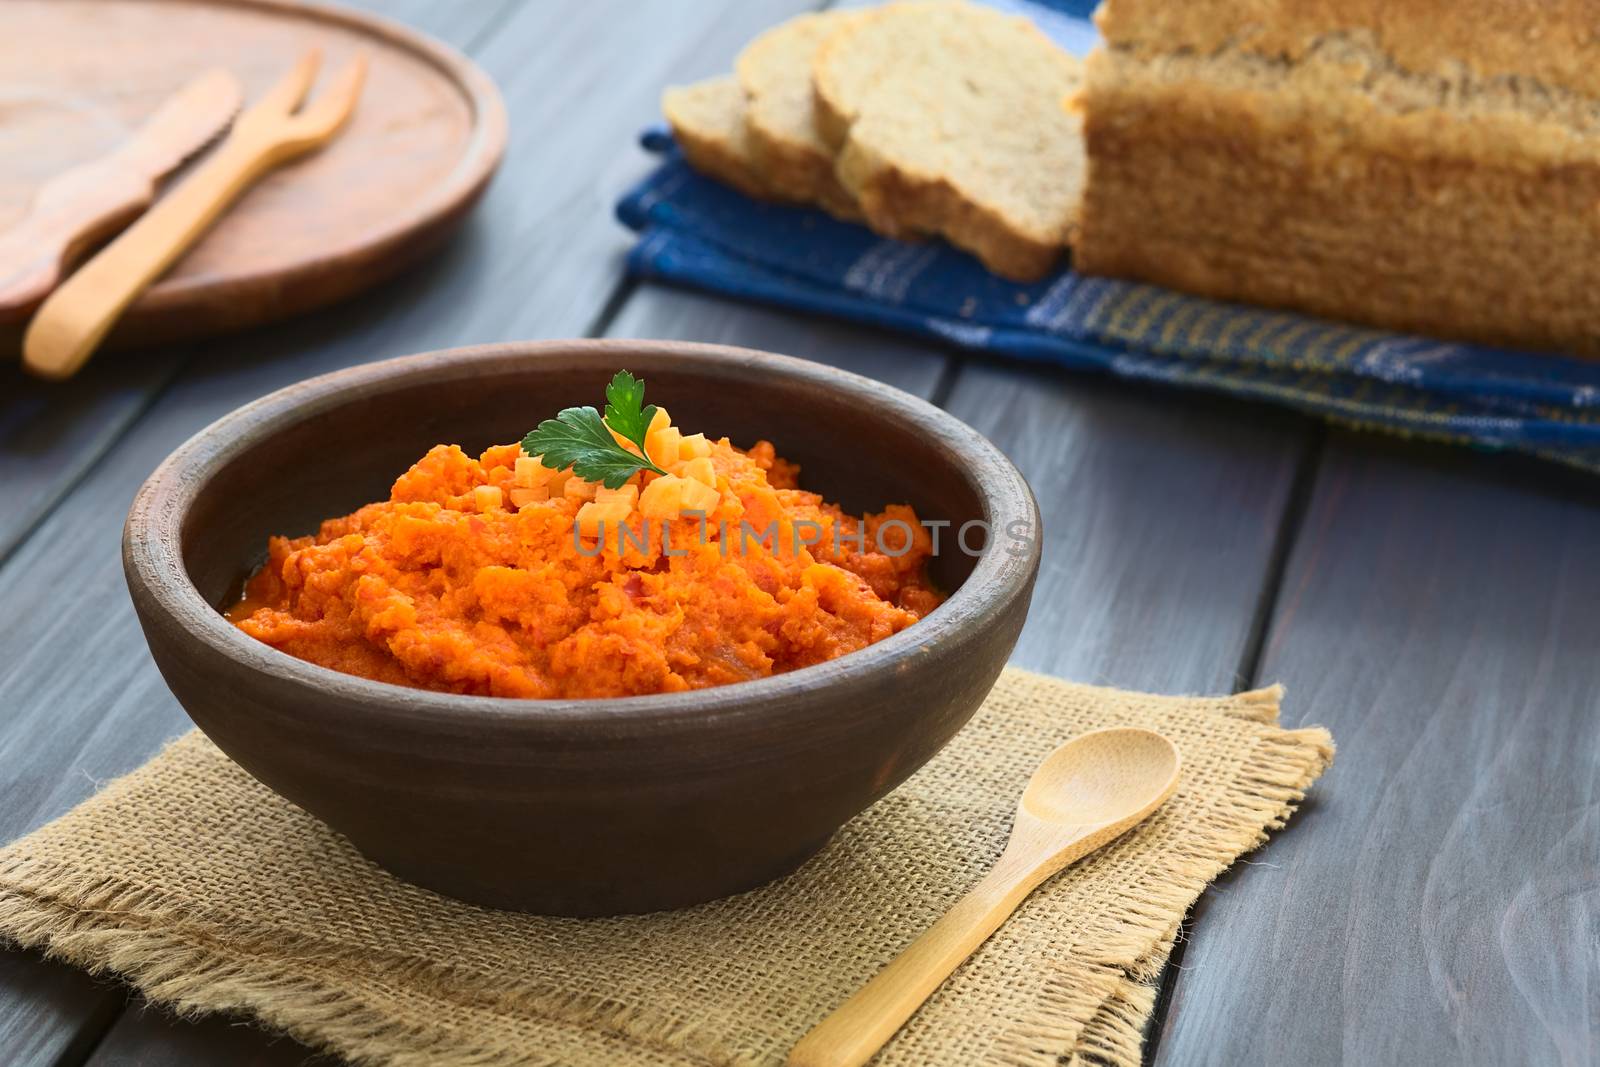 Carrot and Red Bell Pepper Spread by ildi